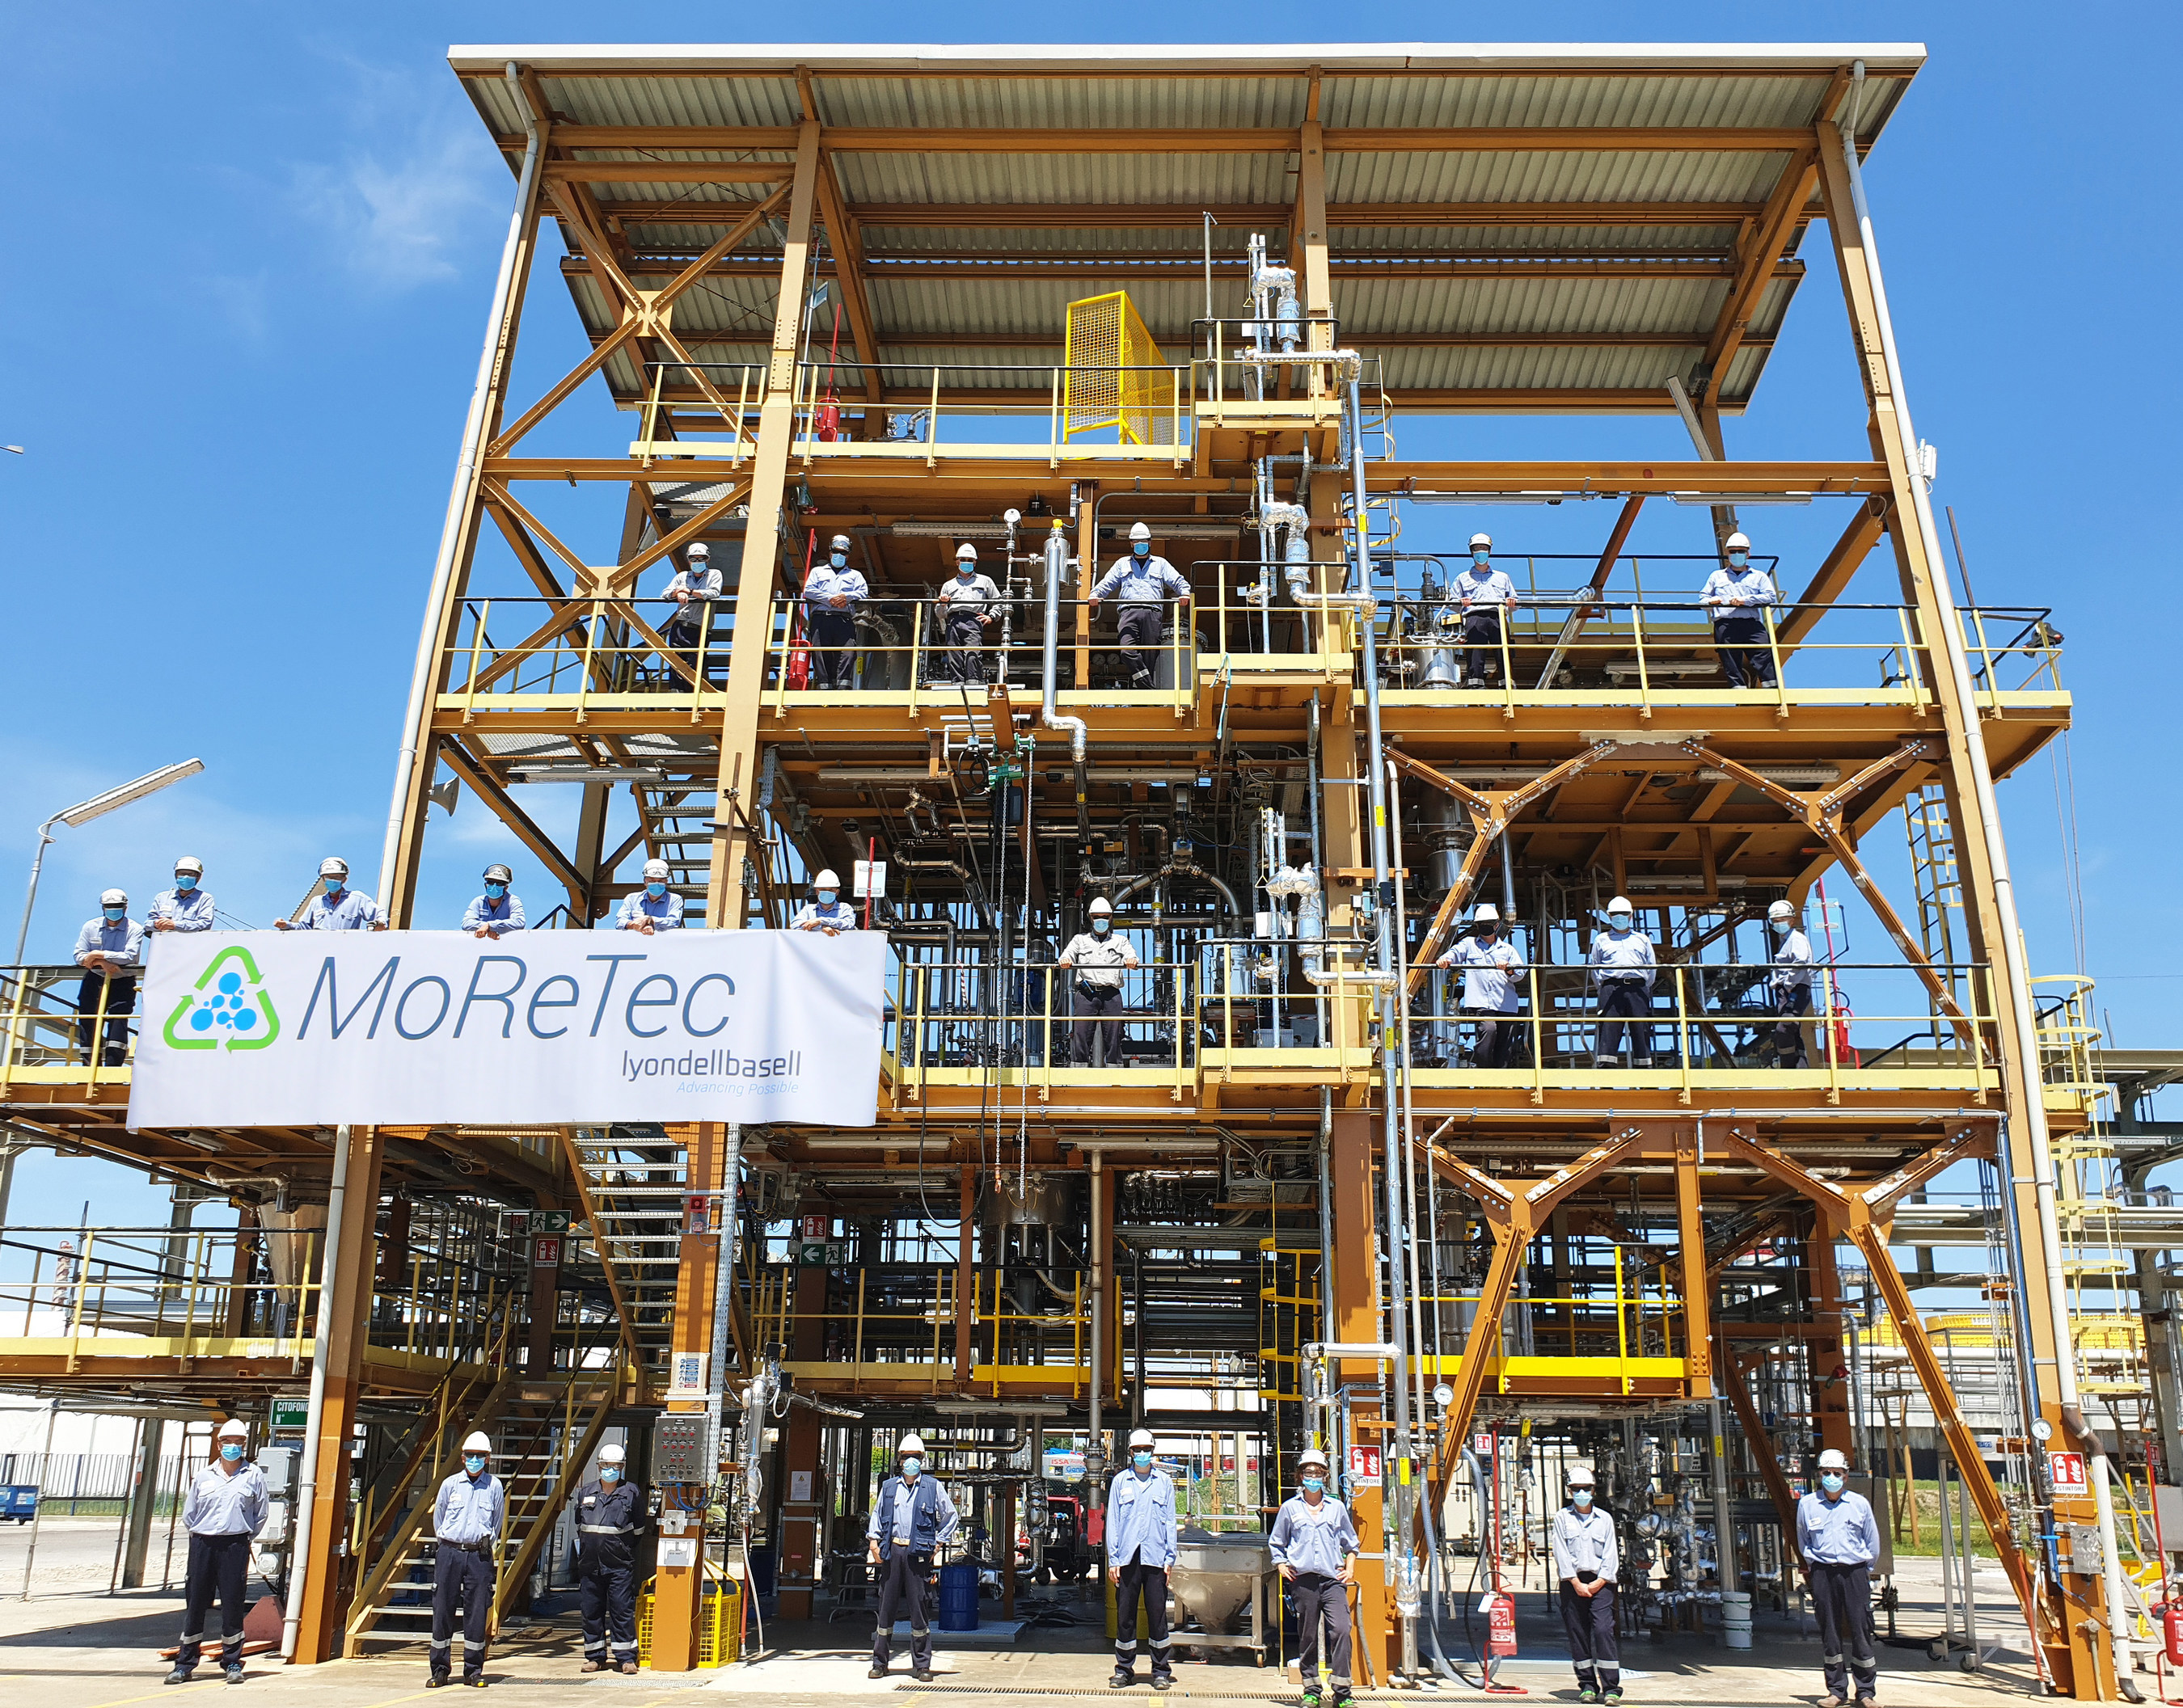 LyondellBasell’s MoReTec technology aims to use post-consumer plastic waste as a feedstock for new plastic materials.